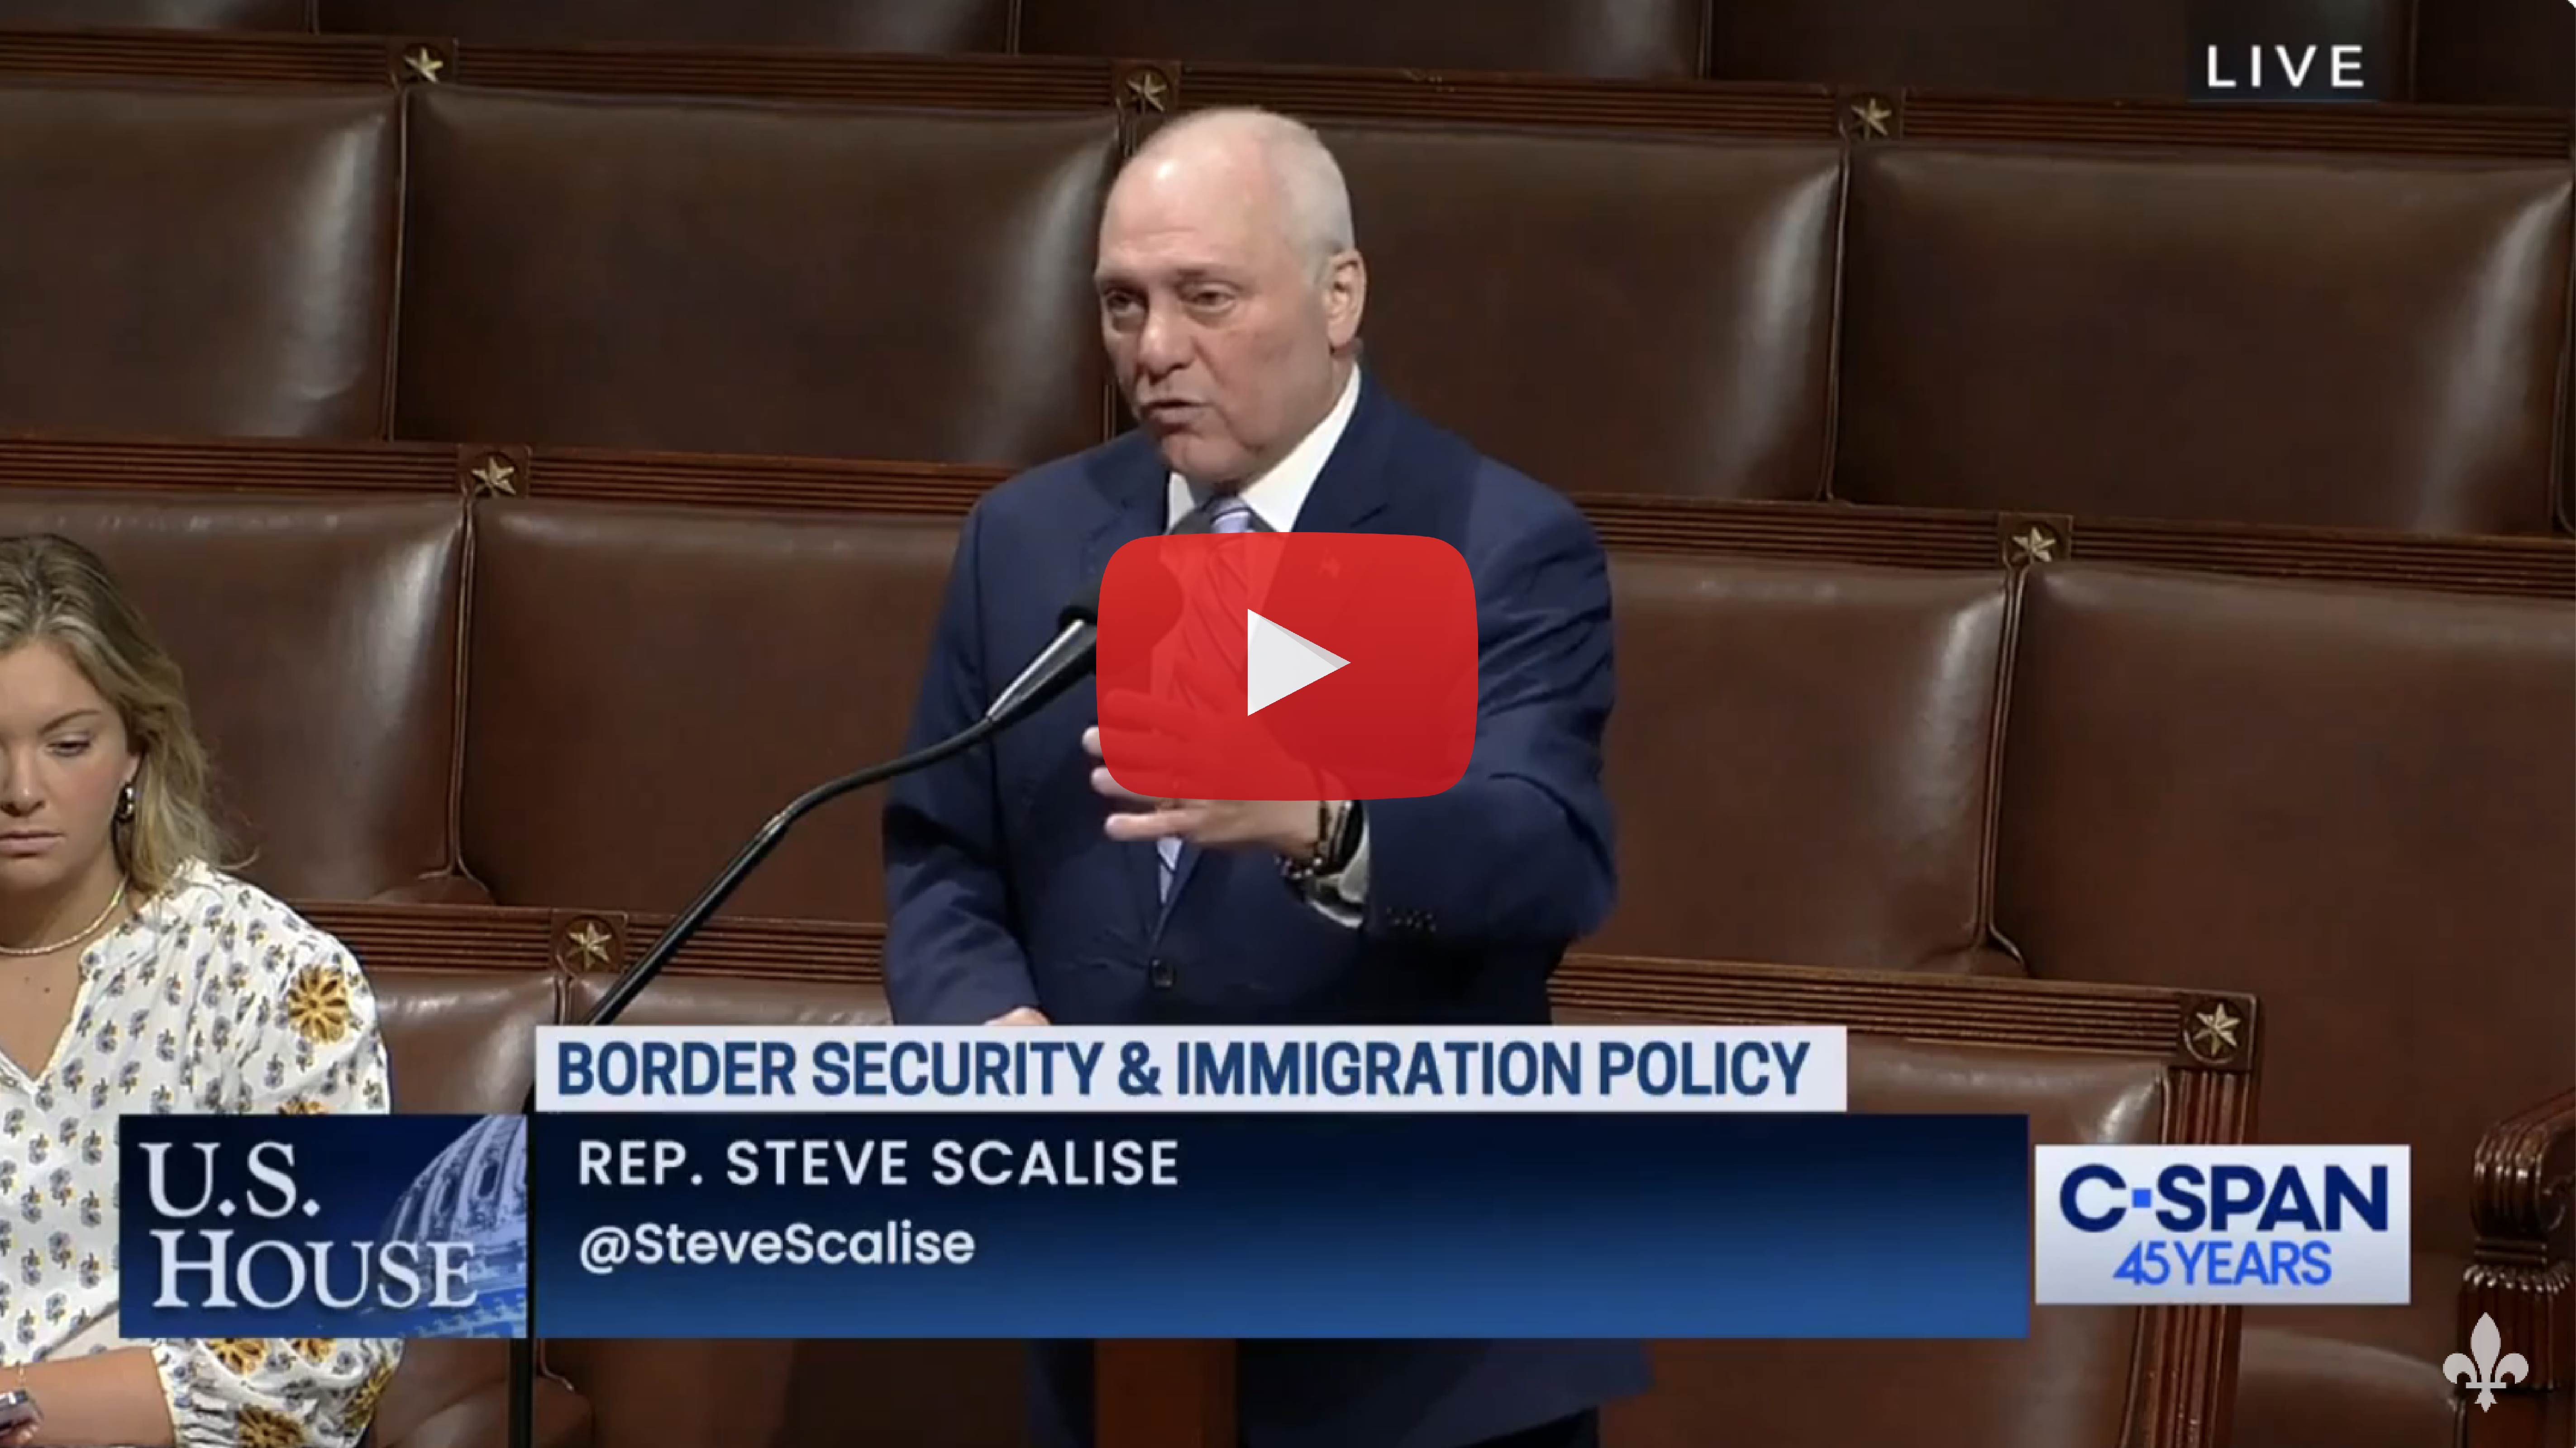 Scalise: Step by Step, Biden Has Opened the Border